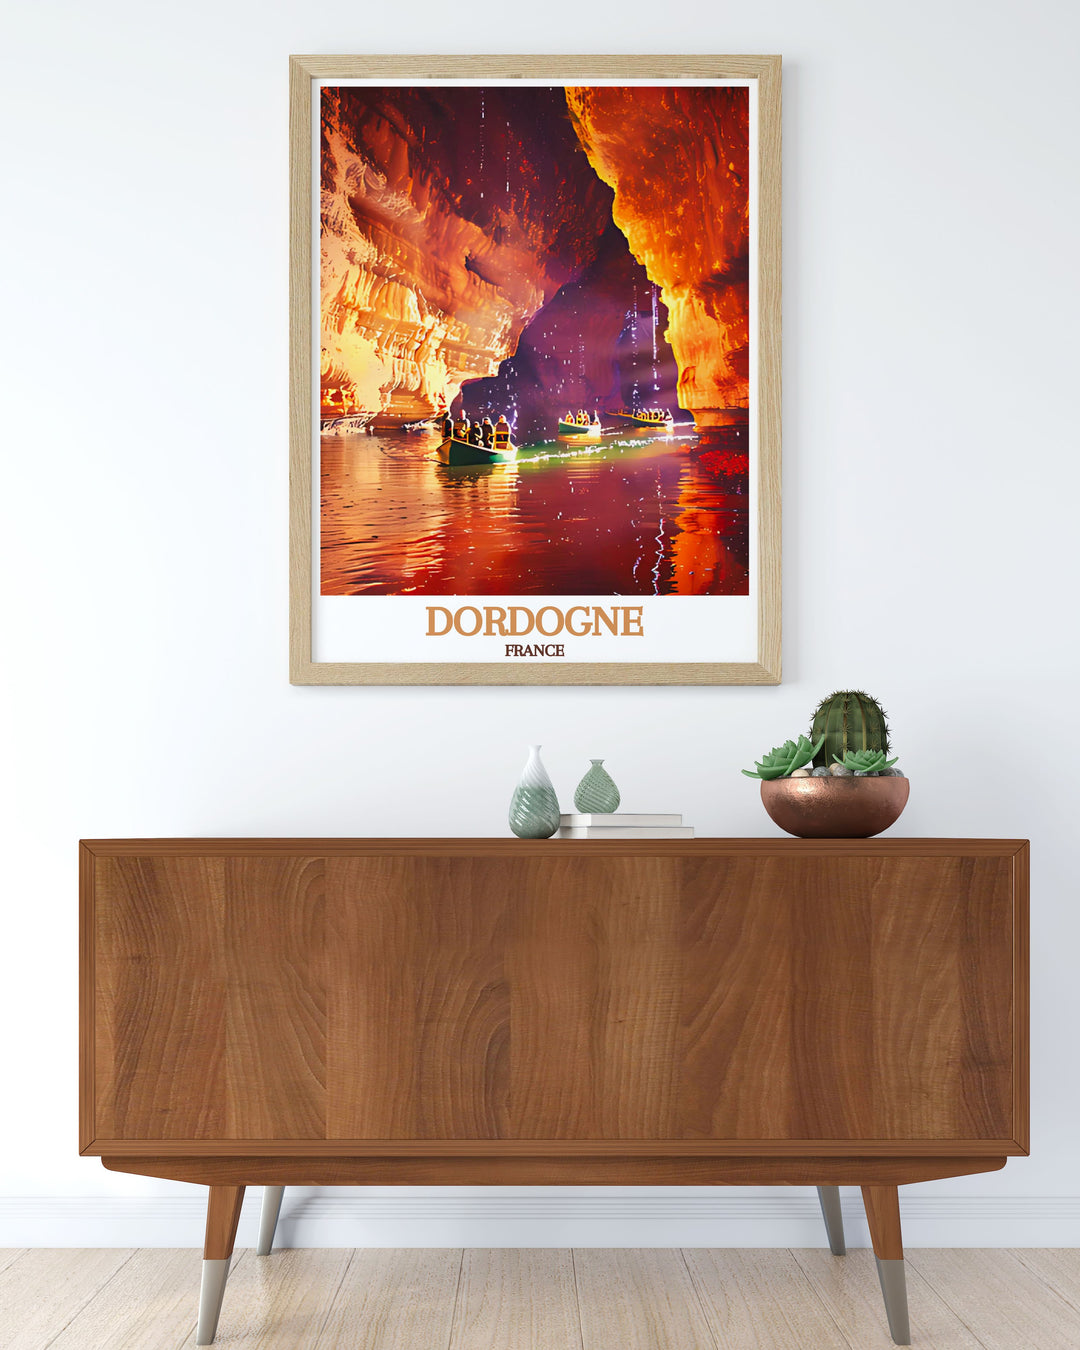 Dordognes rich cultural heritage is highlighted in this travel poster, featuring its charming villages and historical landmarks, perfect for those who appreciate French history and culture.